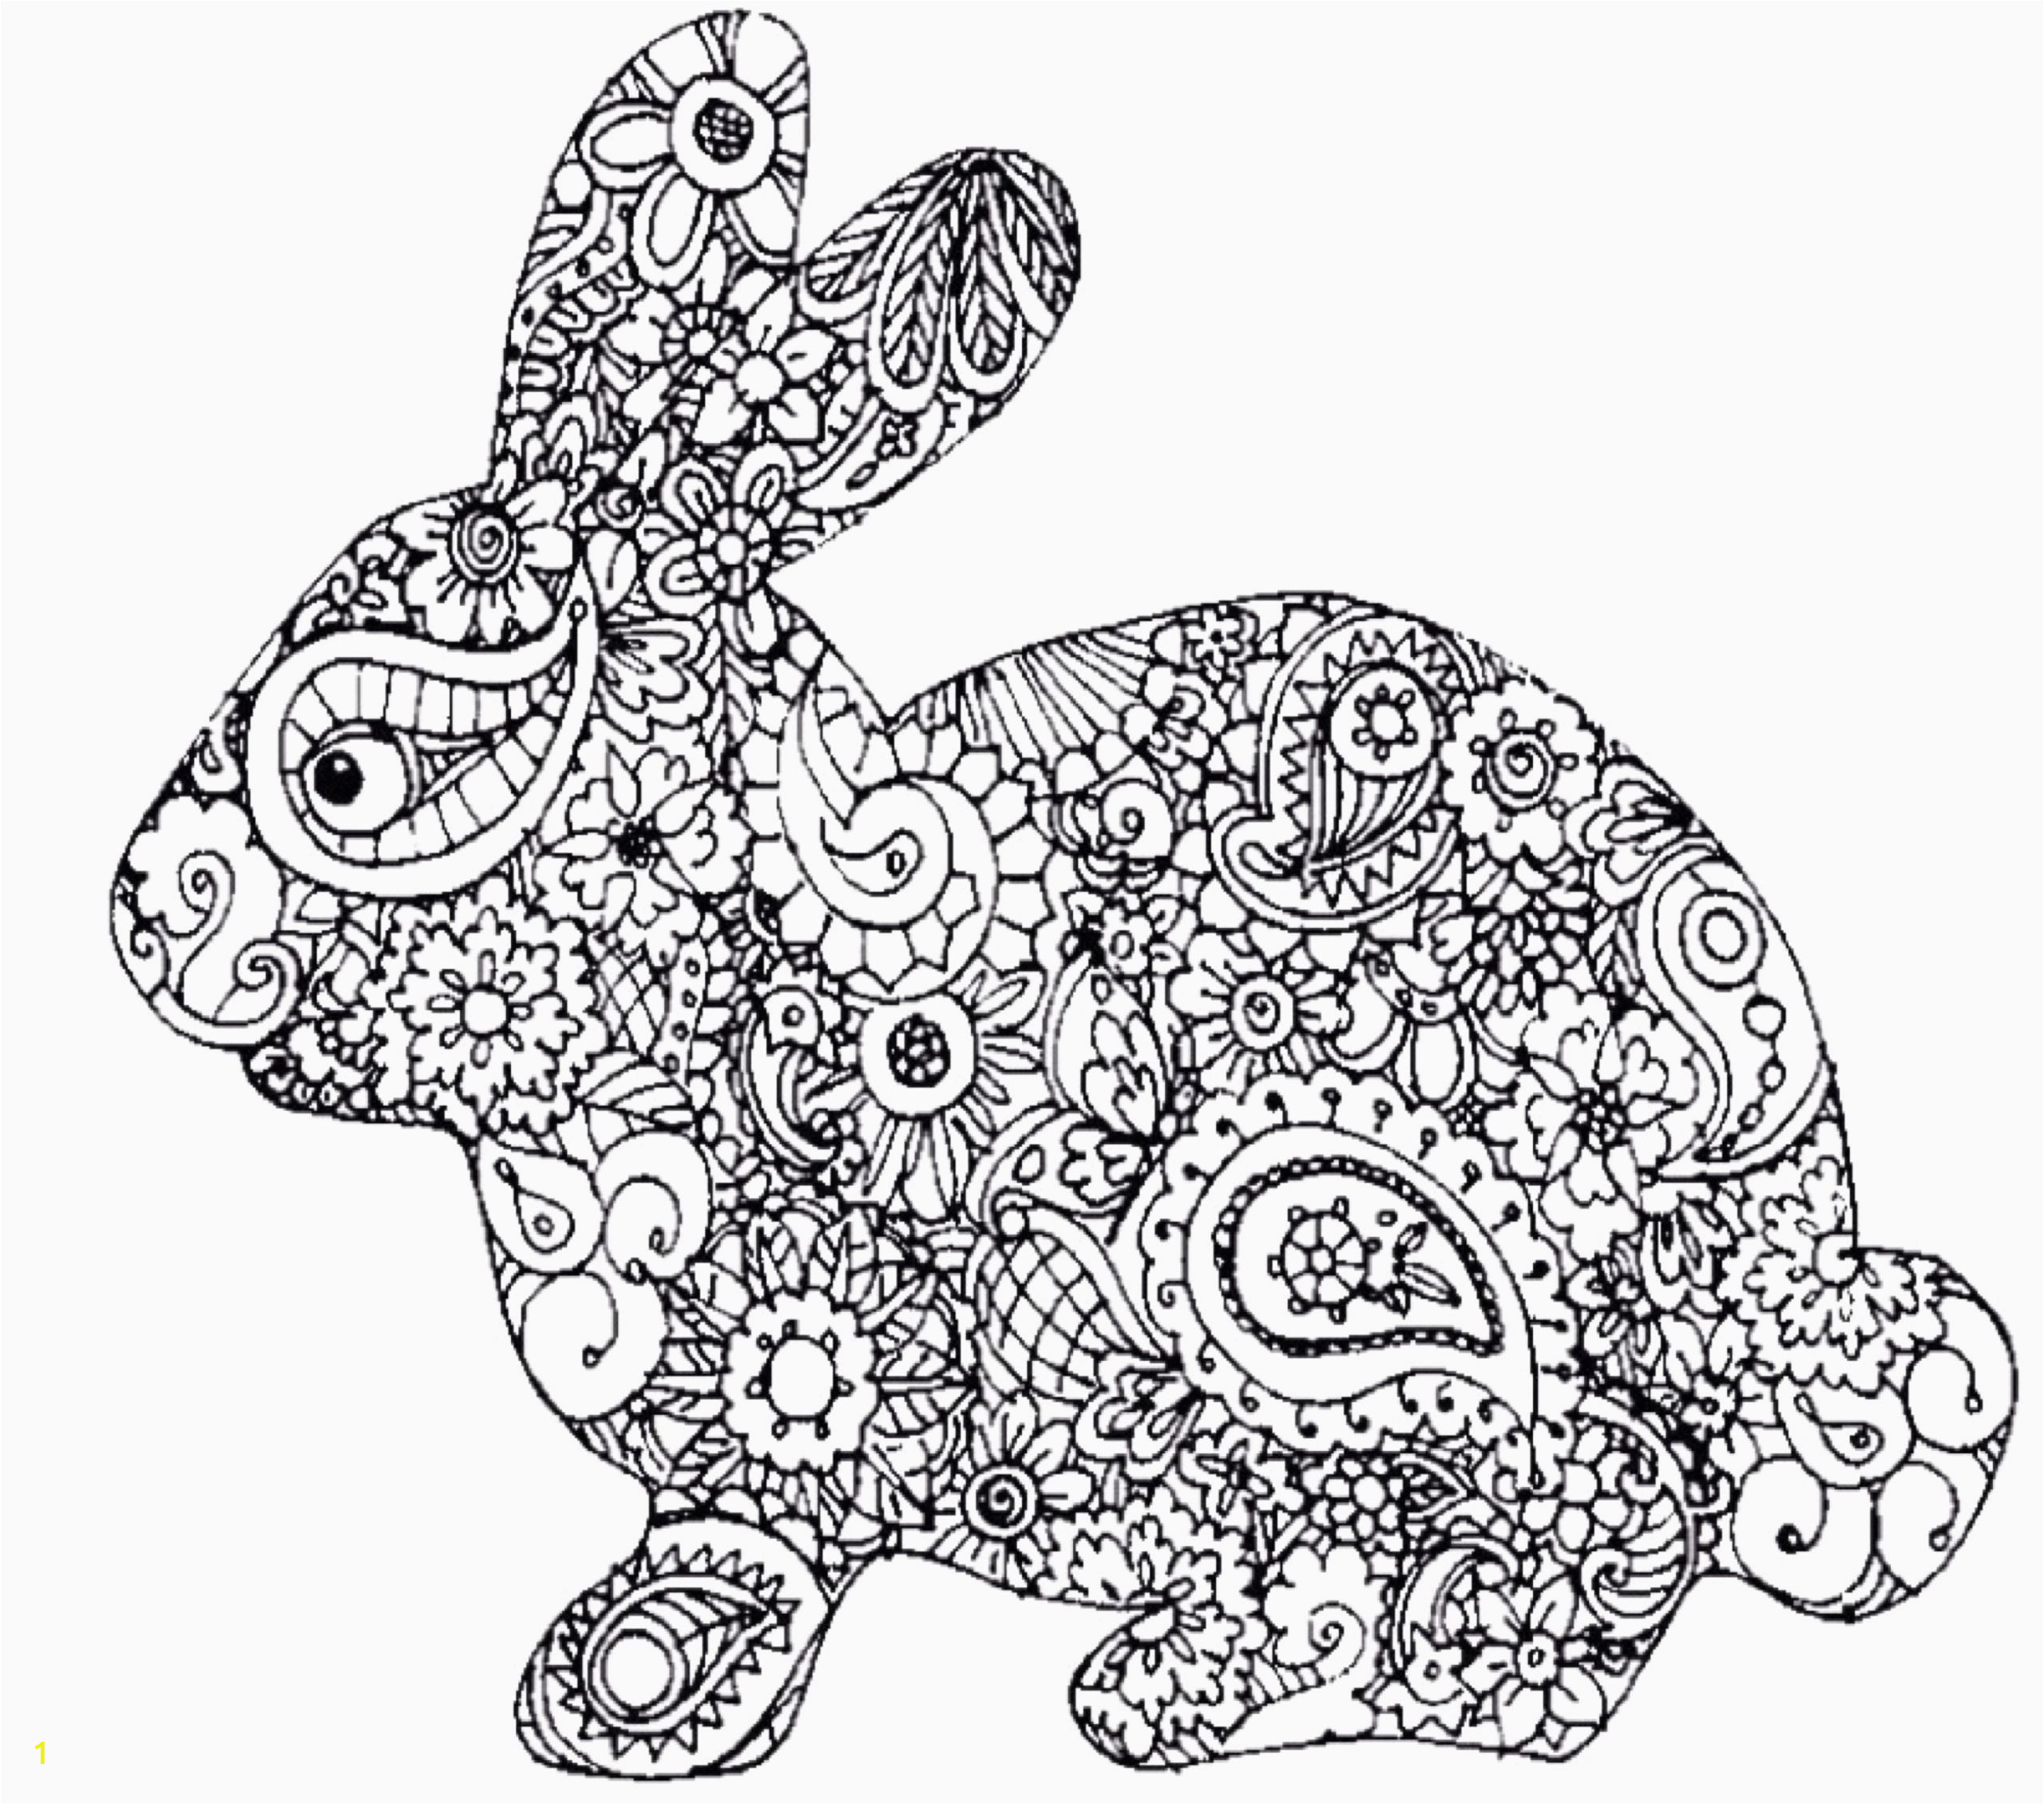 Easter Bunny Coloring Pages Printable Free Animal Adult Coloring Pages In 2020